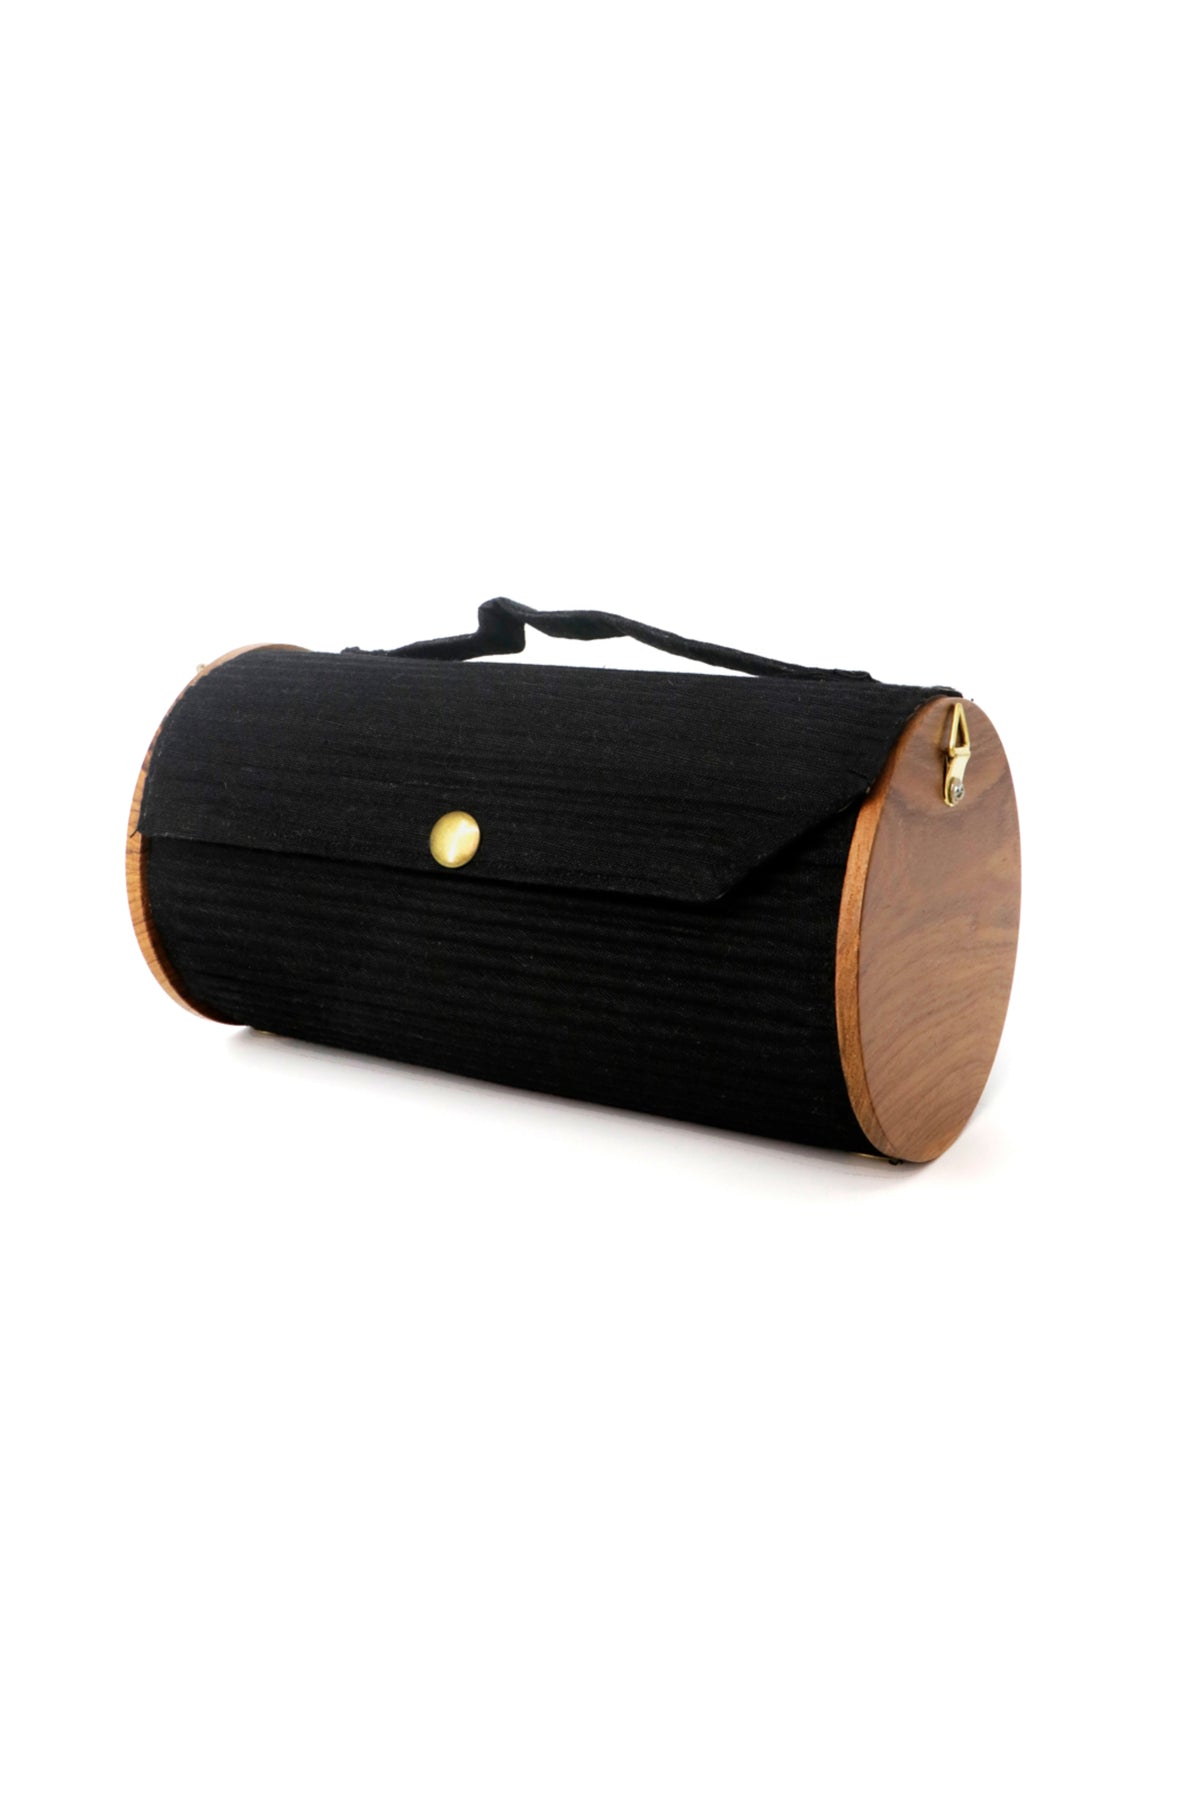 Sweet Pea &amp; Solid Black Round Clutch - Changeable Sleeve